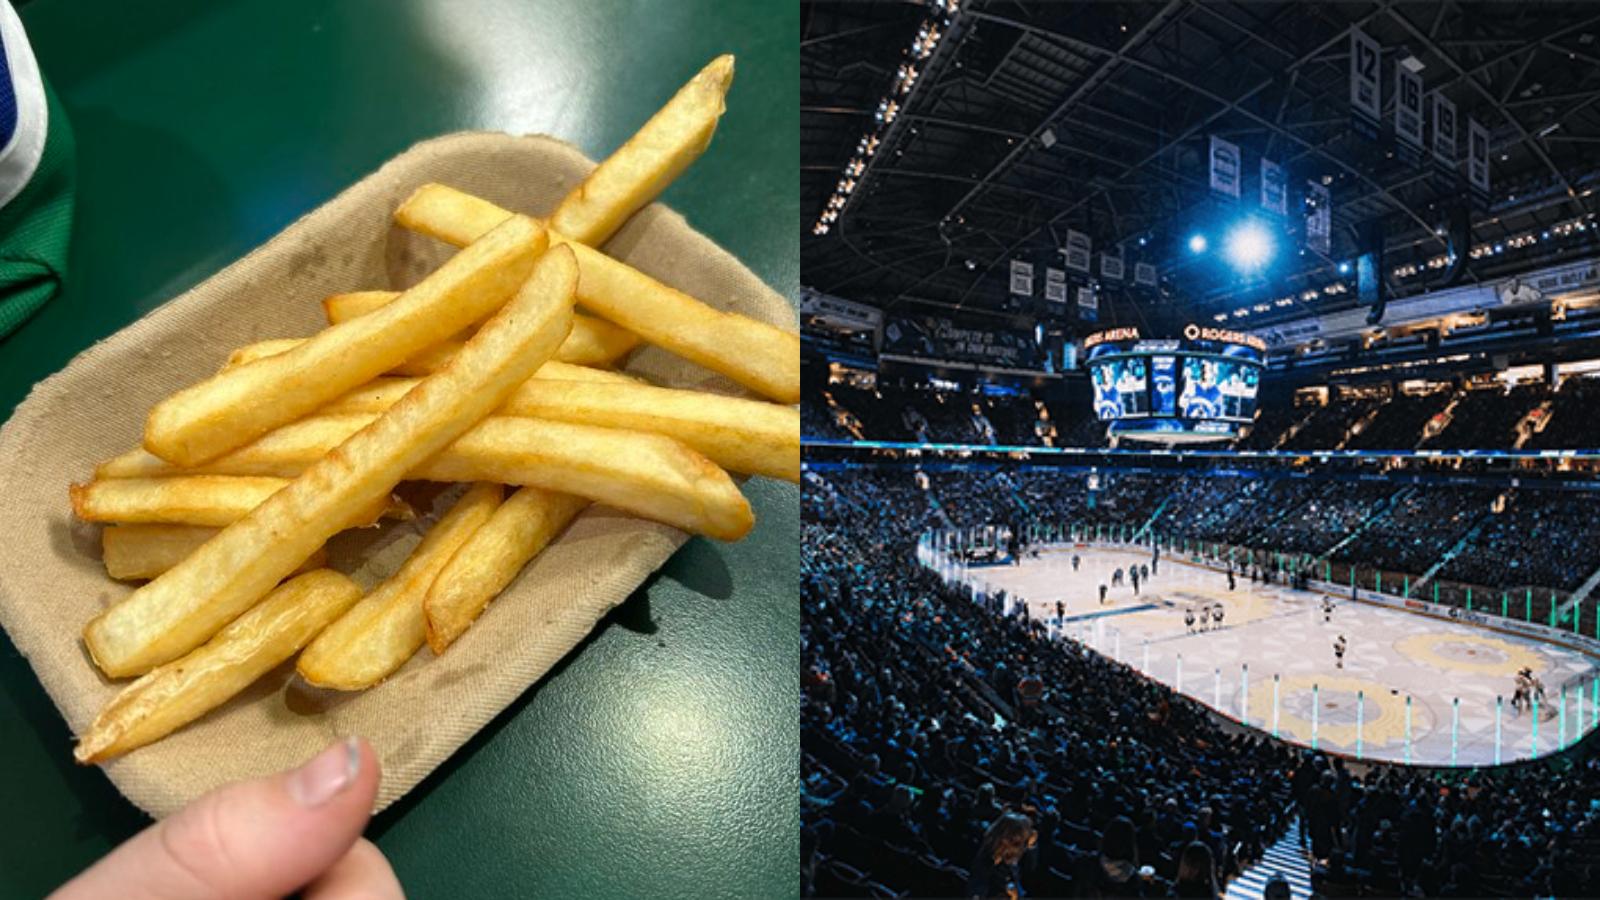 $8 fries at rogers arena canucks game